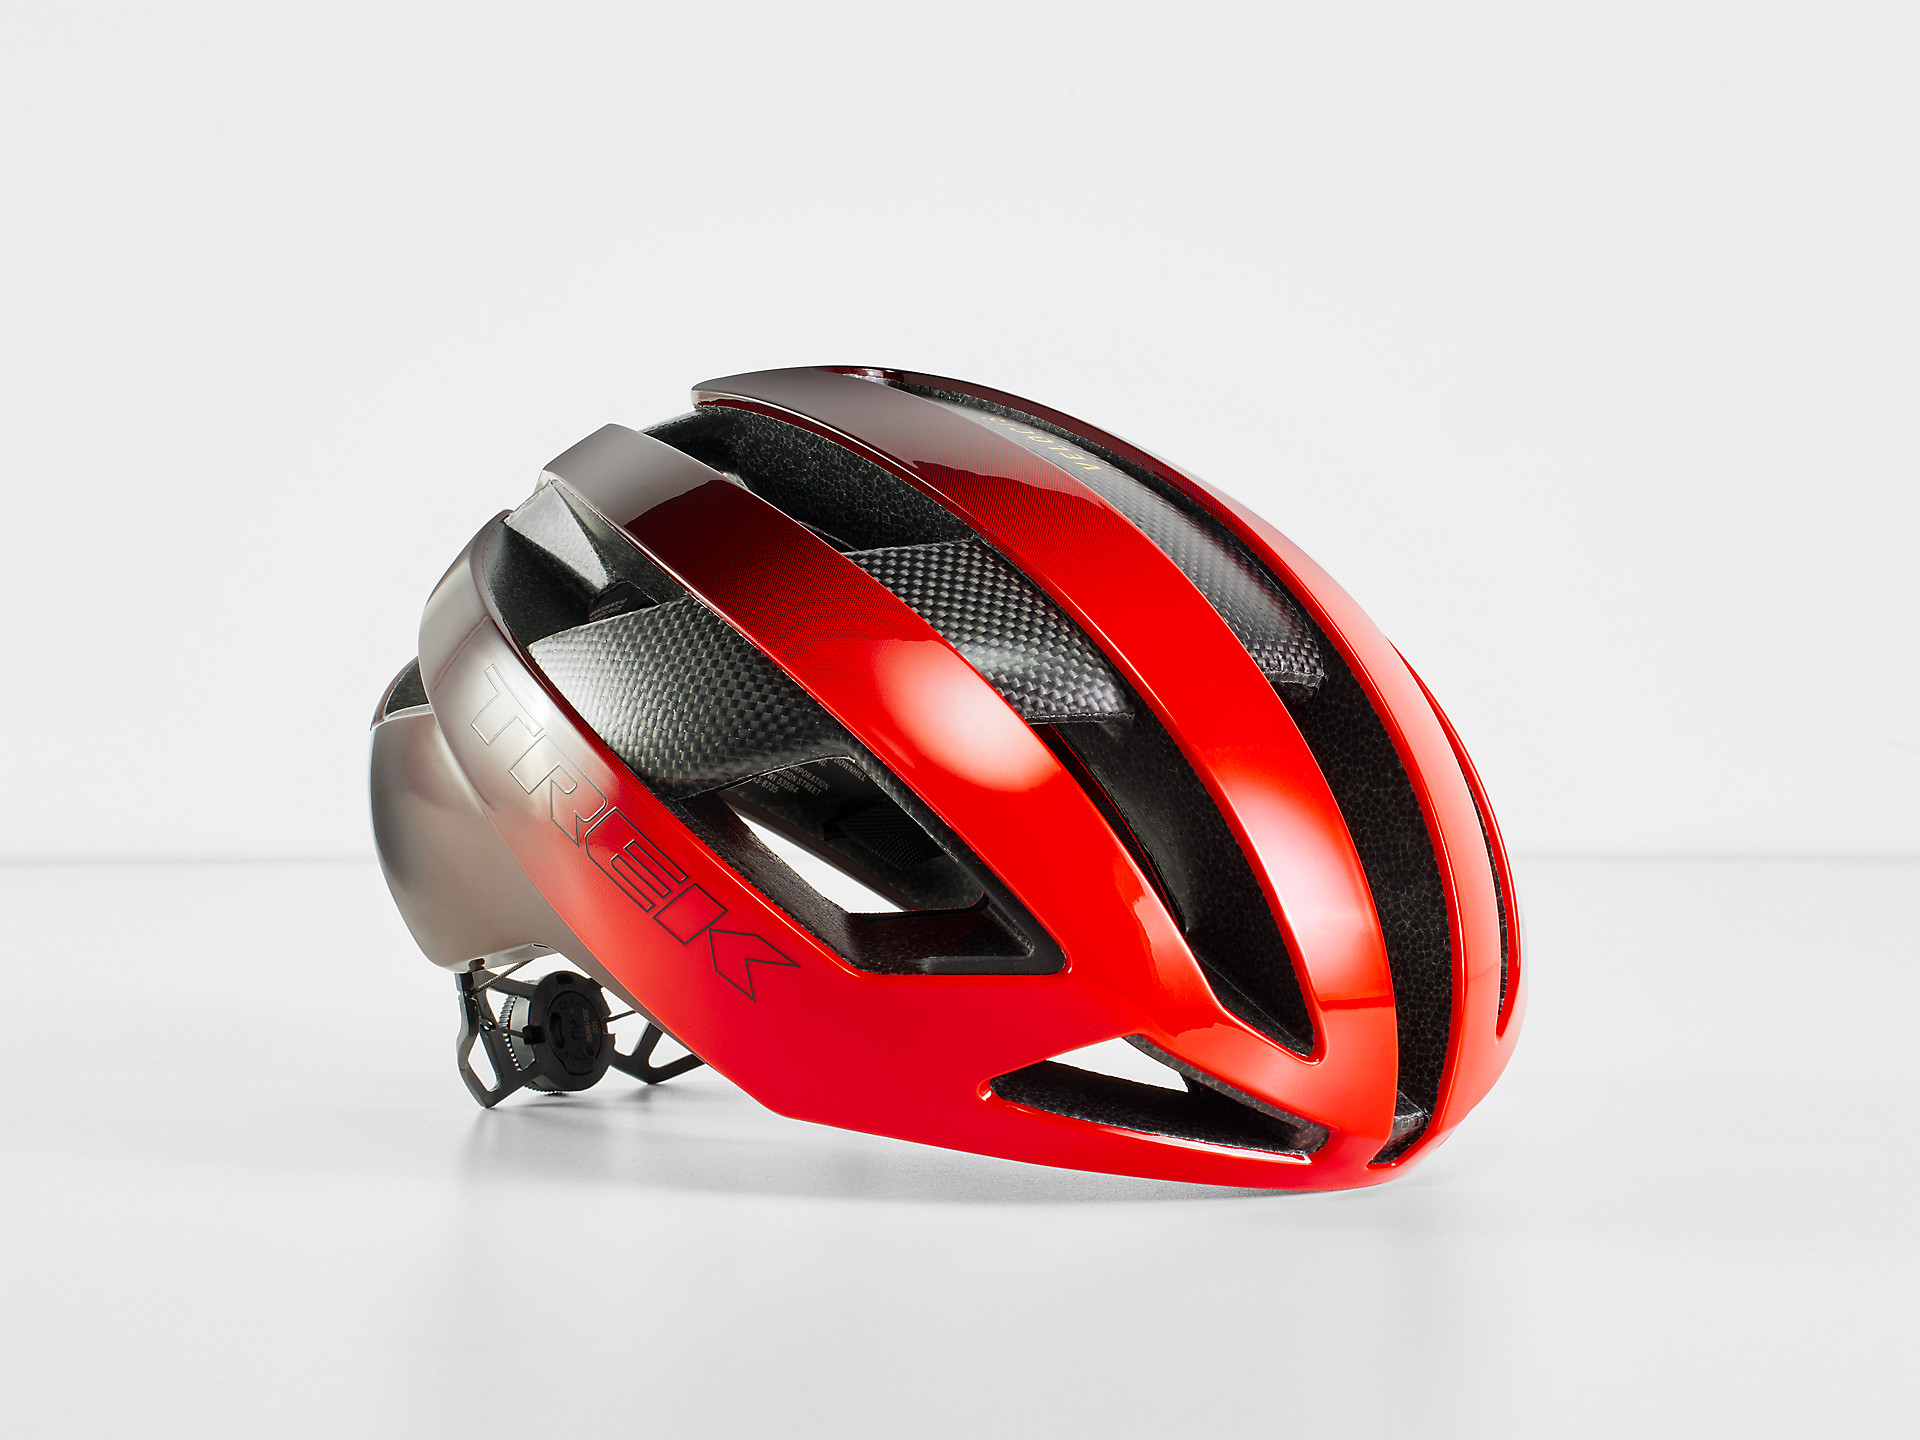 <a href="https://cycles-clement.be/product/casque-trek-velocis-mips-m-viper-red-rouge-cobra/">CASQUE TREK VELOCIS MIPS  M VIPER RED/ROUGE COBRA</a>